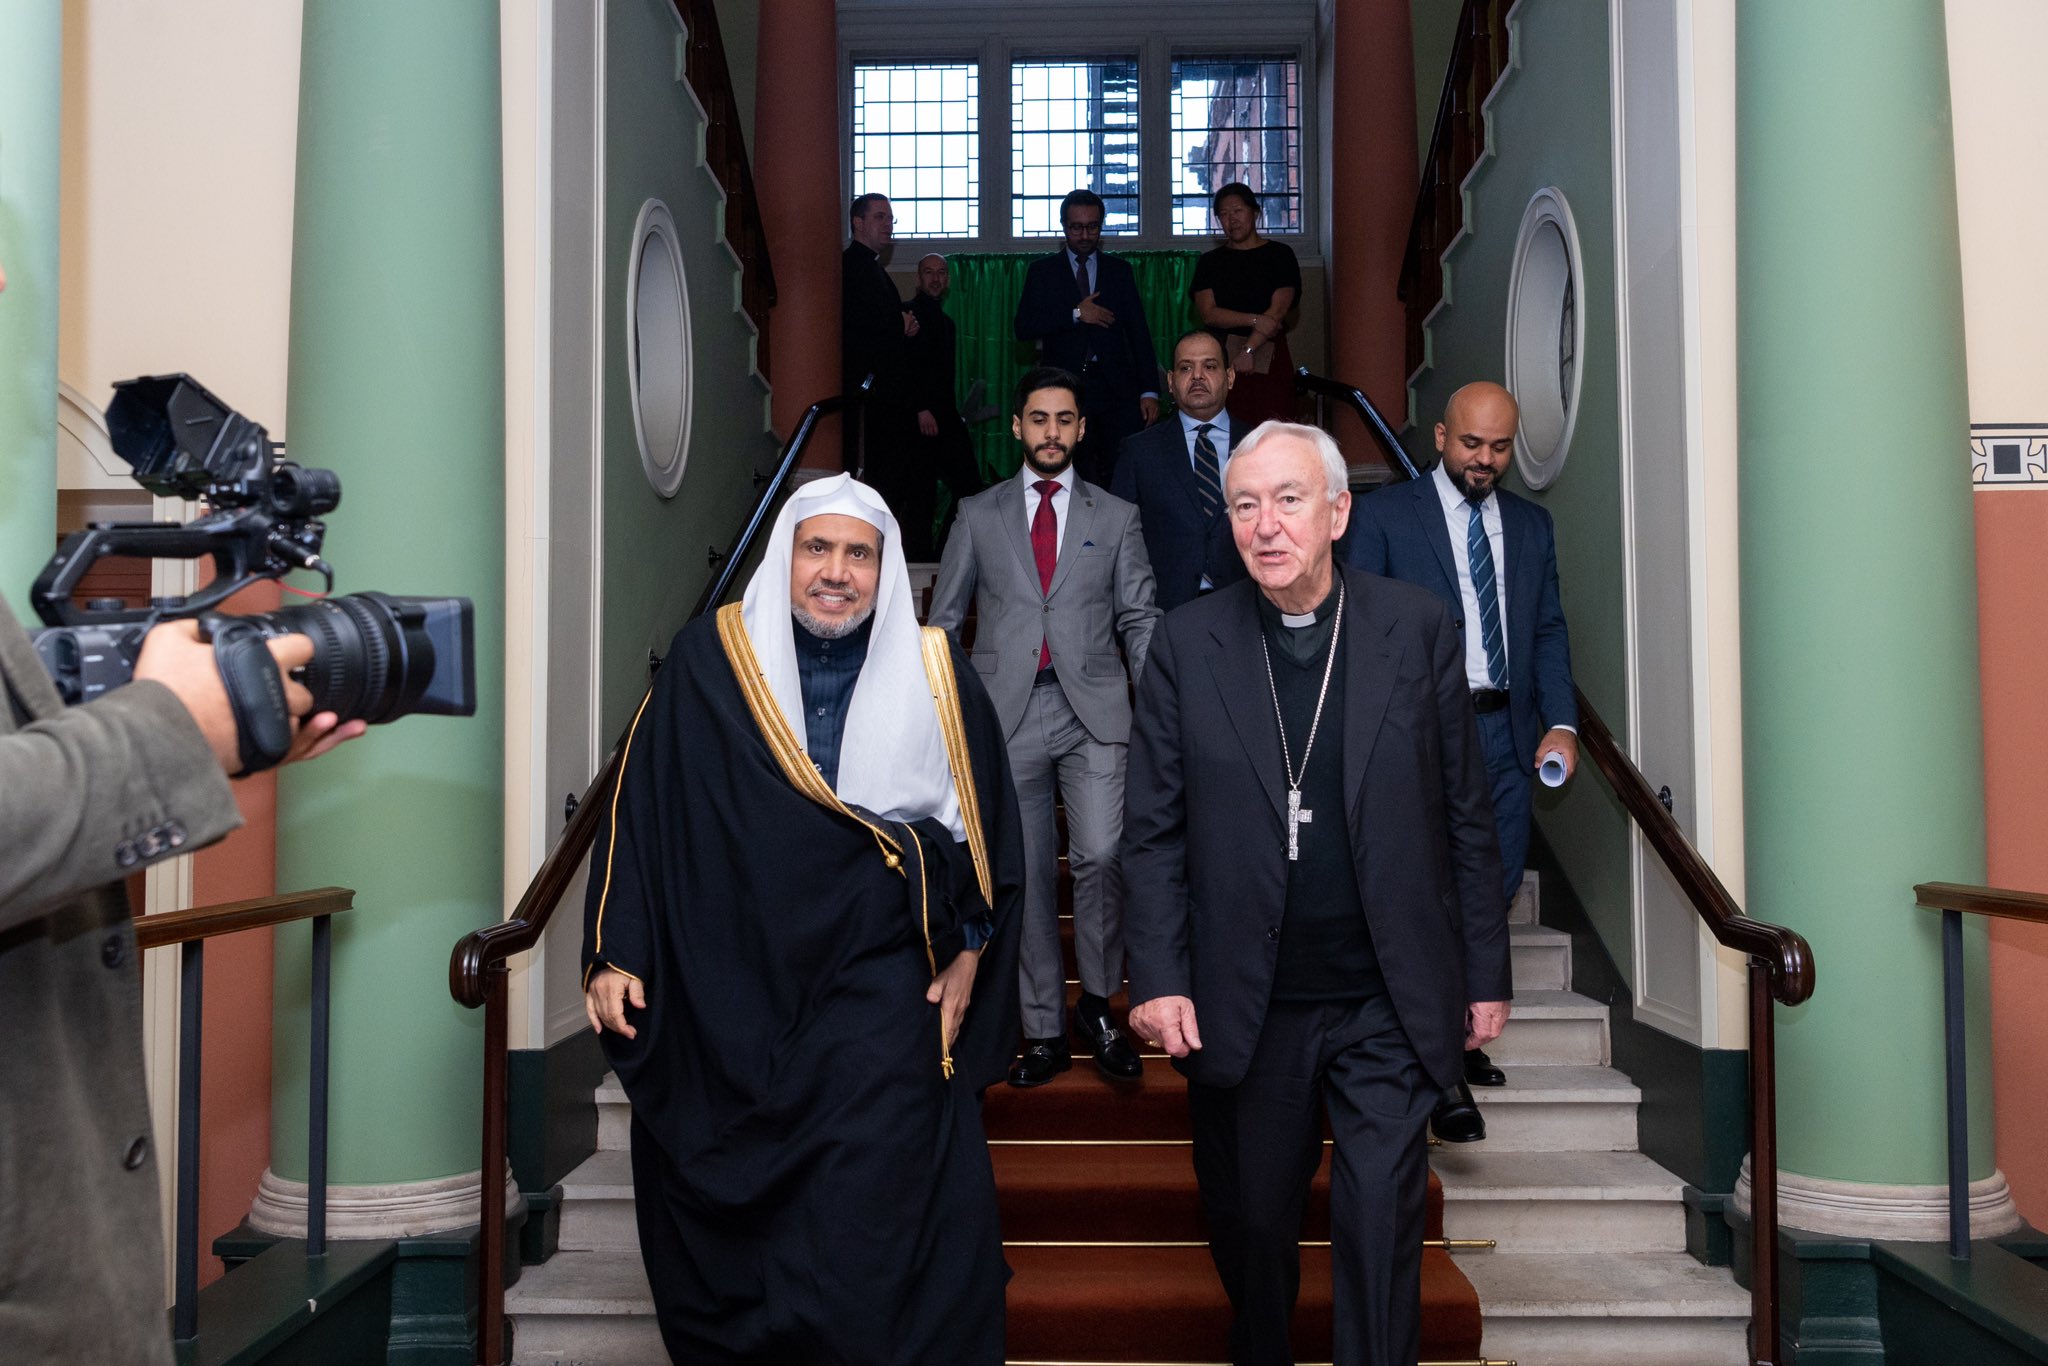 HE Sheikh Dr.Mohammad Alissa , the SG of the MWL, met with HE Cardinal Vincent Collins, the Archbishop of Westminster, in London.